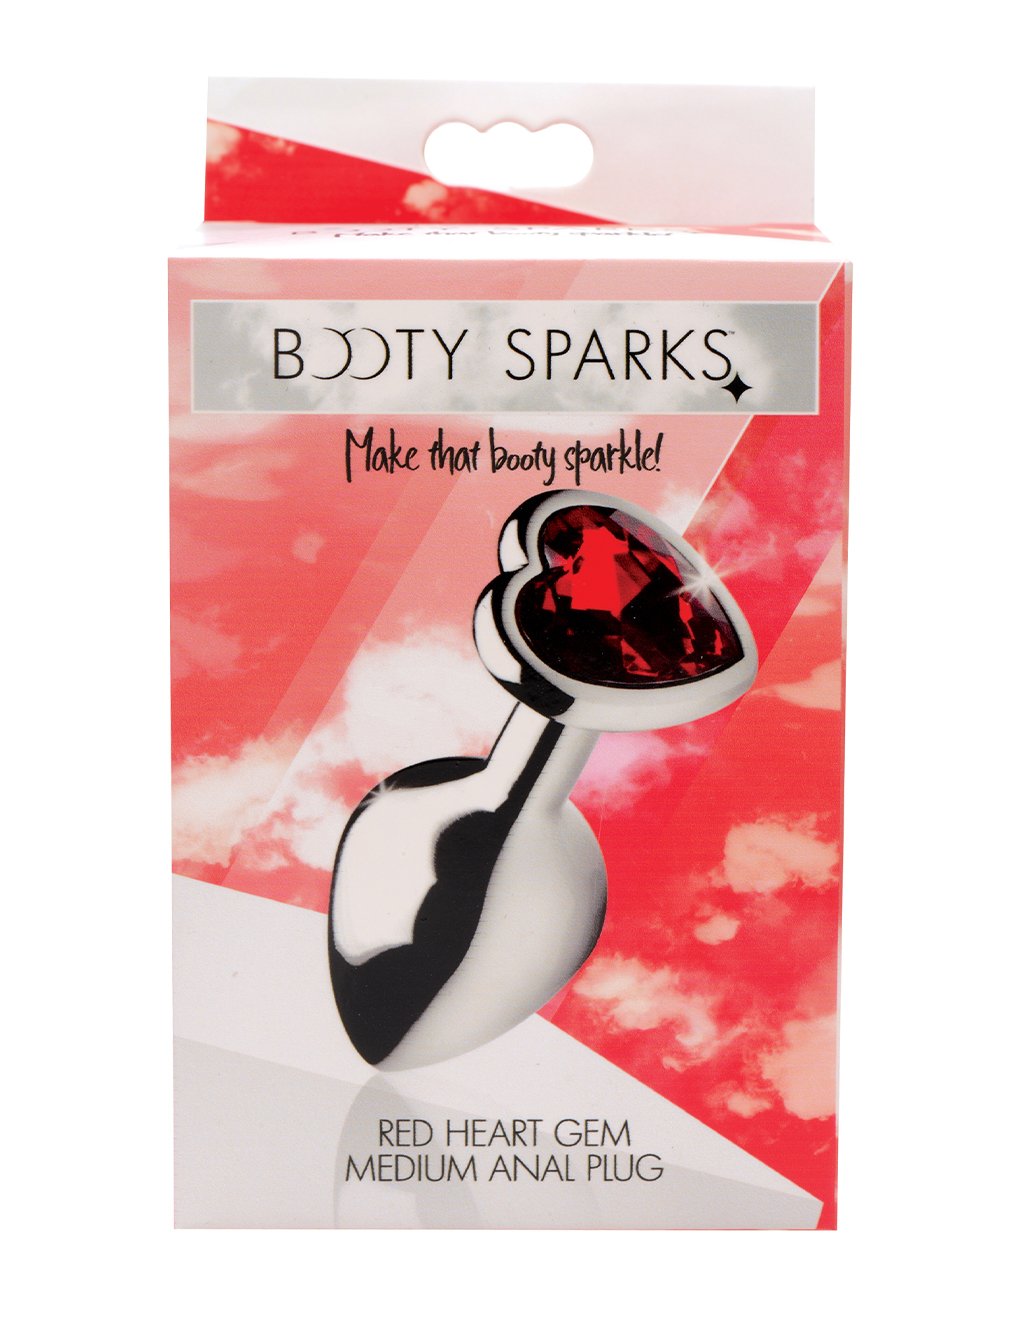 Booty Sparks Red Heart Gem Anal Plug- Medium- Front Box